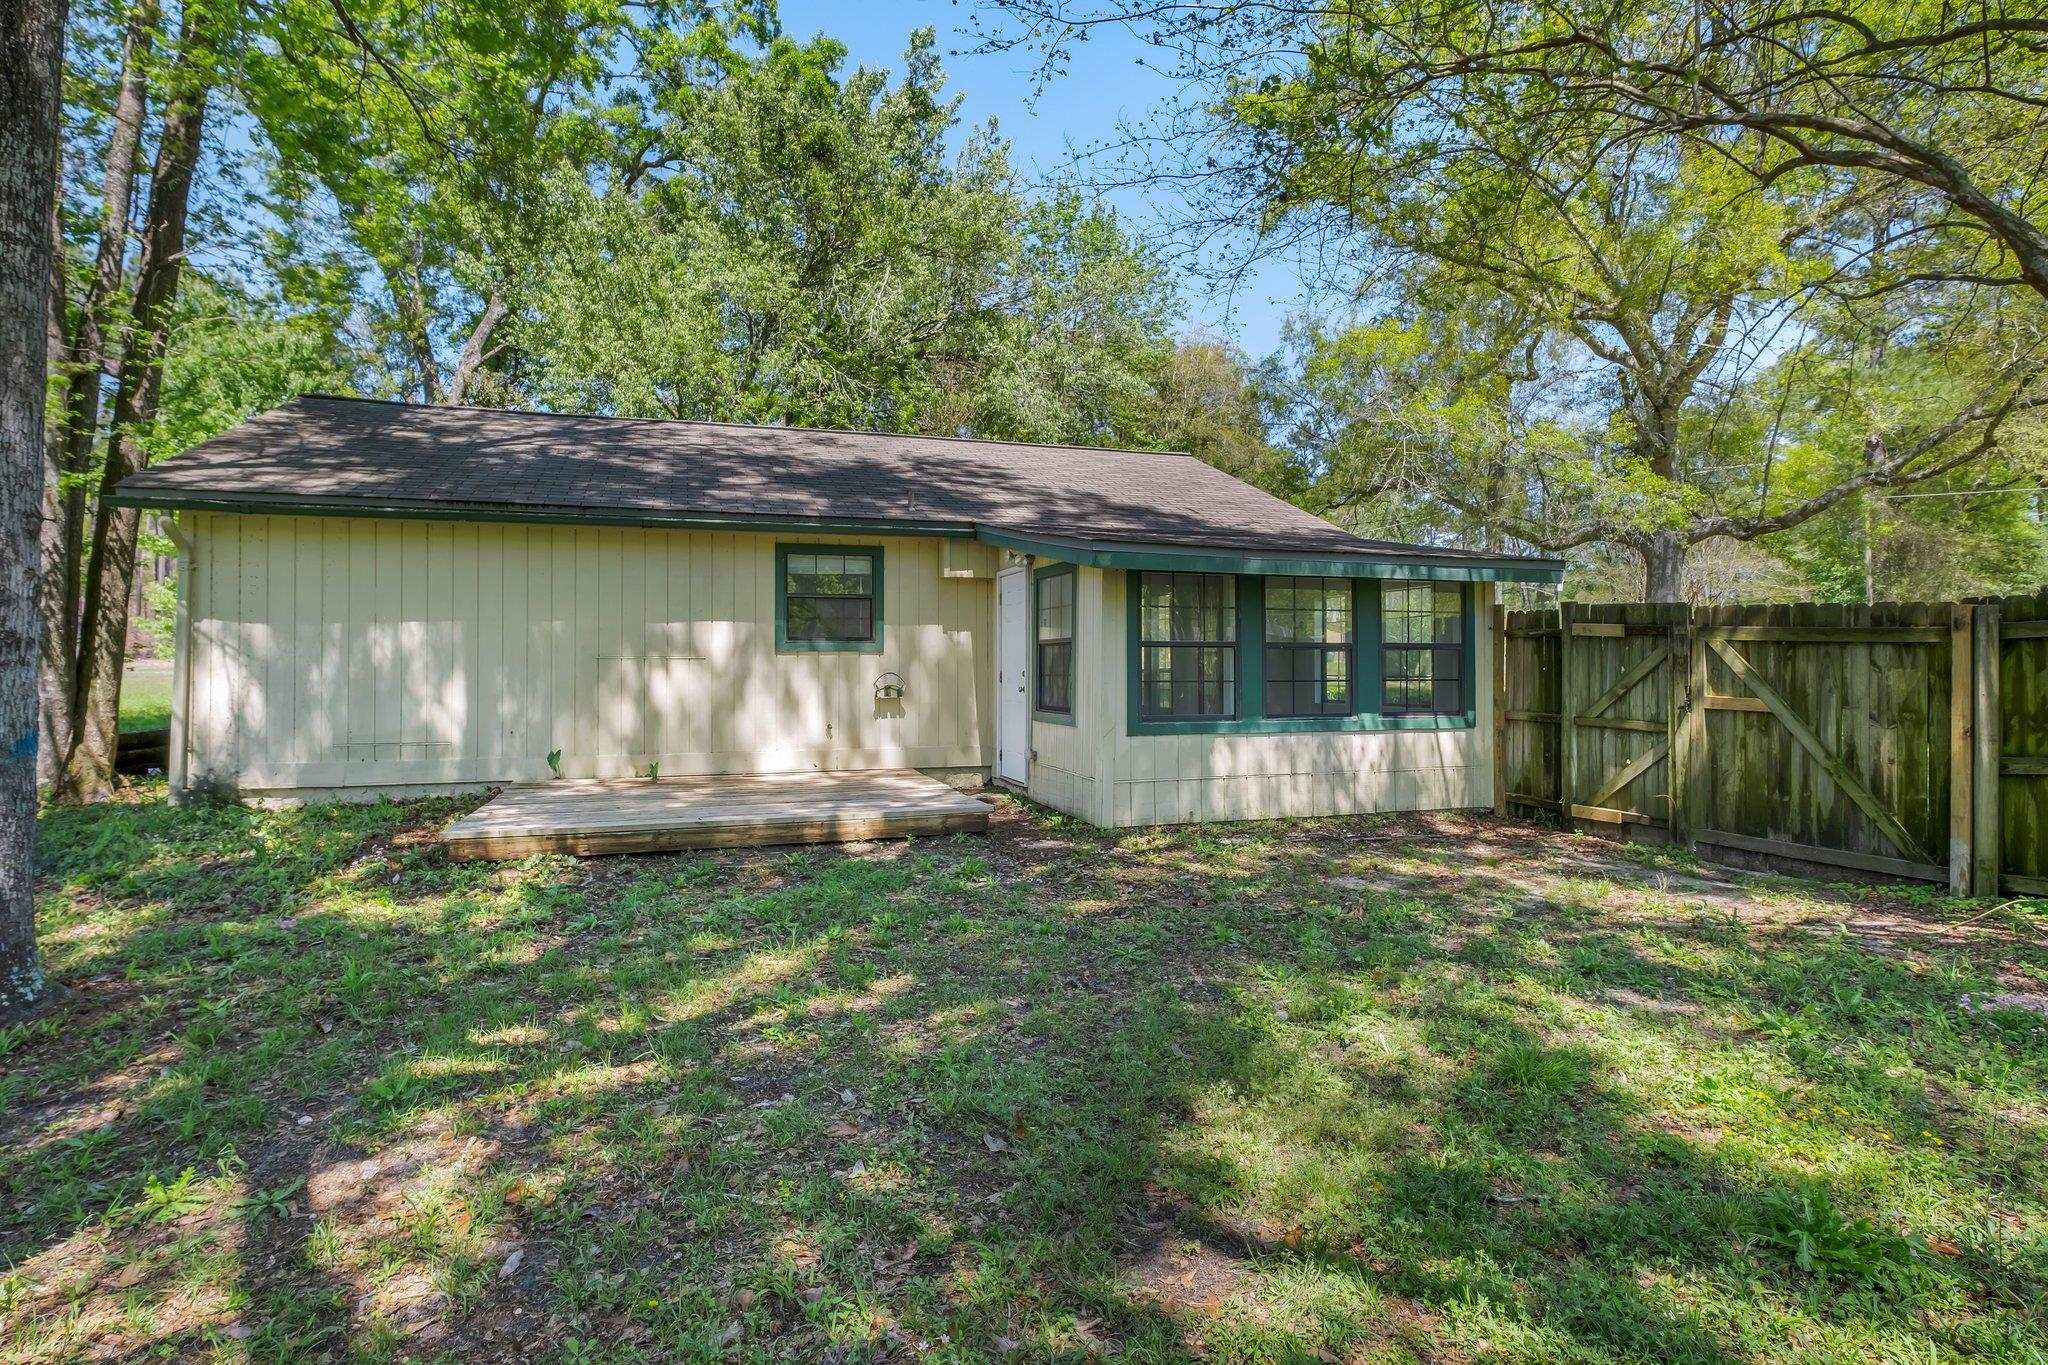 4404 Bright Drive,TALLAHASSEE,Florida 32303,2 Bedrooms Bedrooms,2 BathroomsBathrooms,Detached single family,4404 Bright Drive,370254